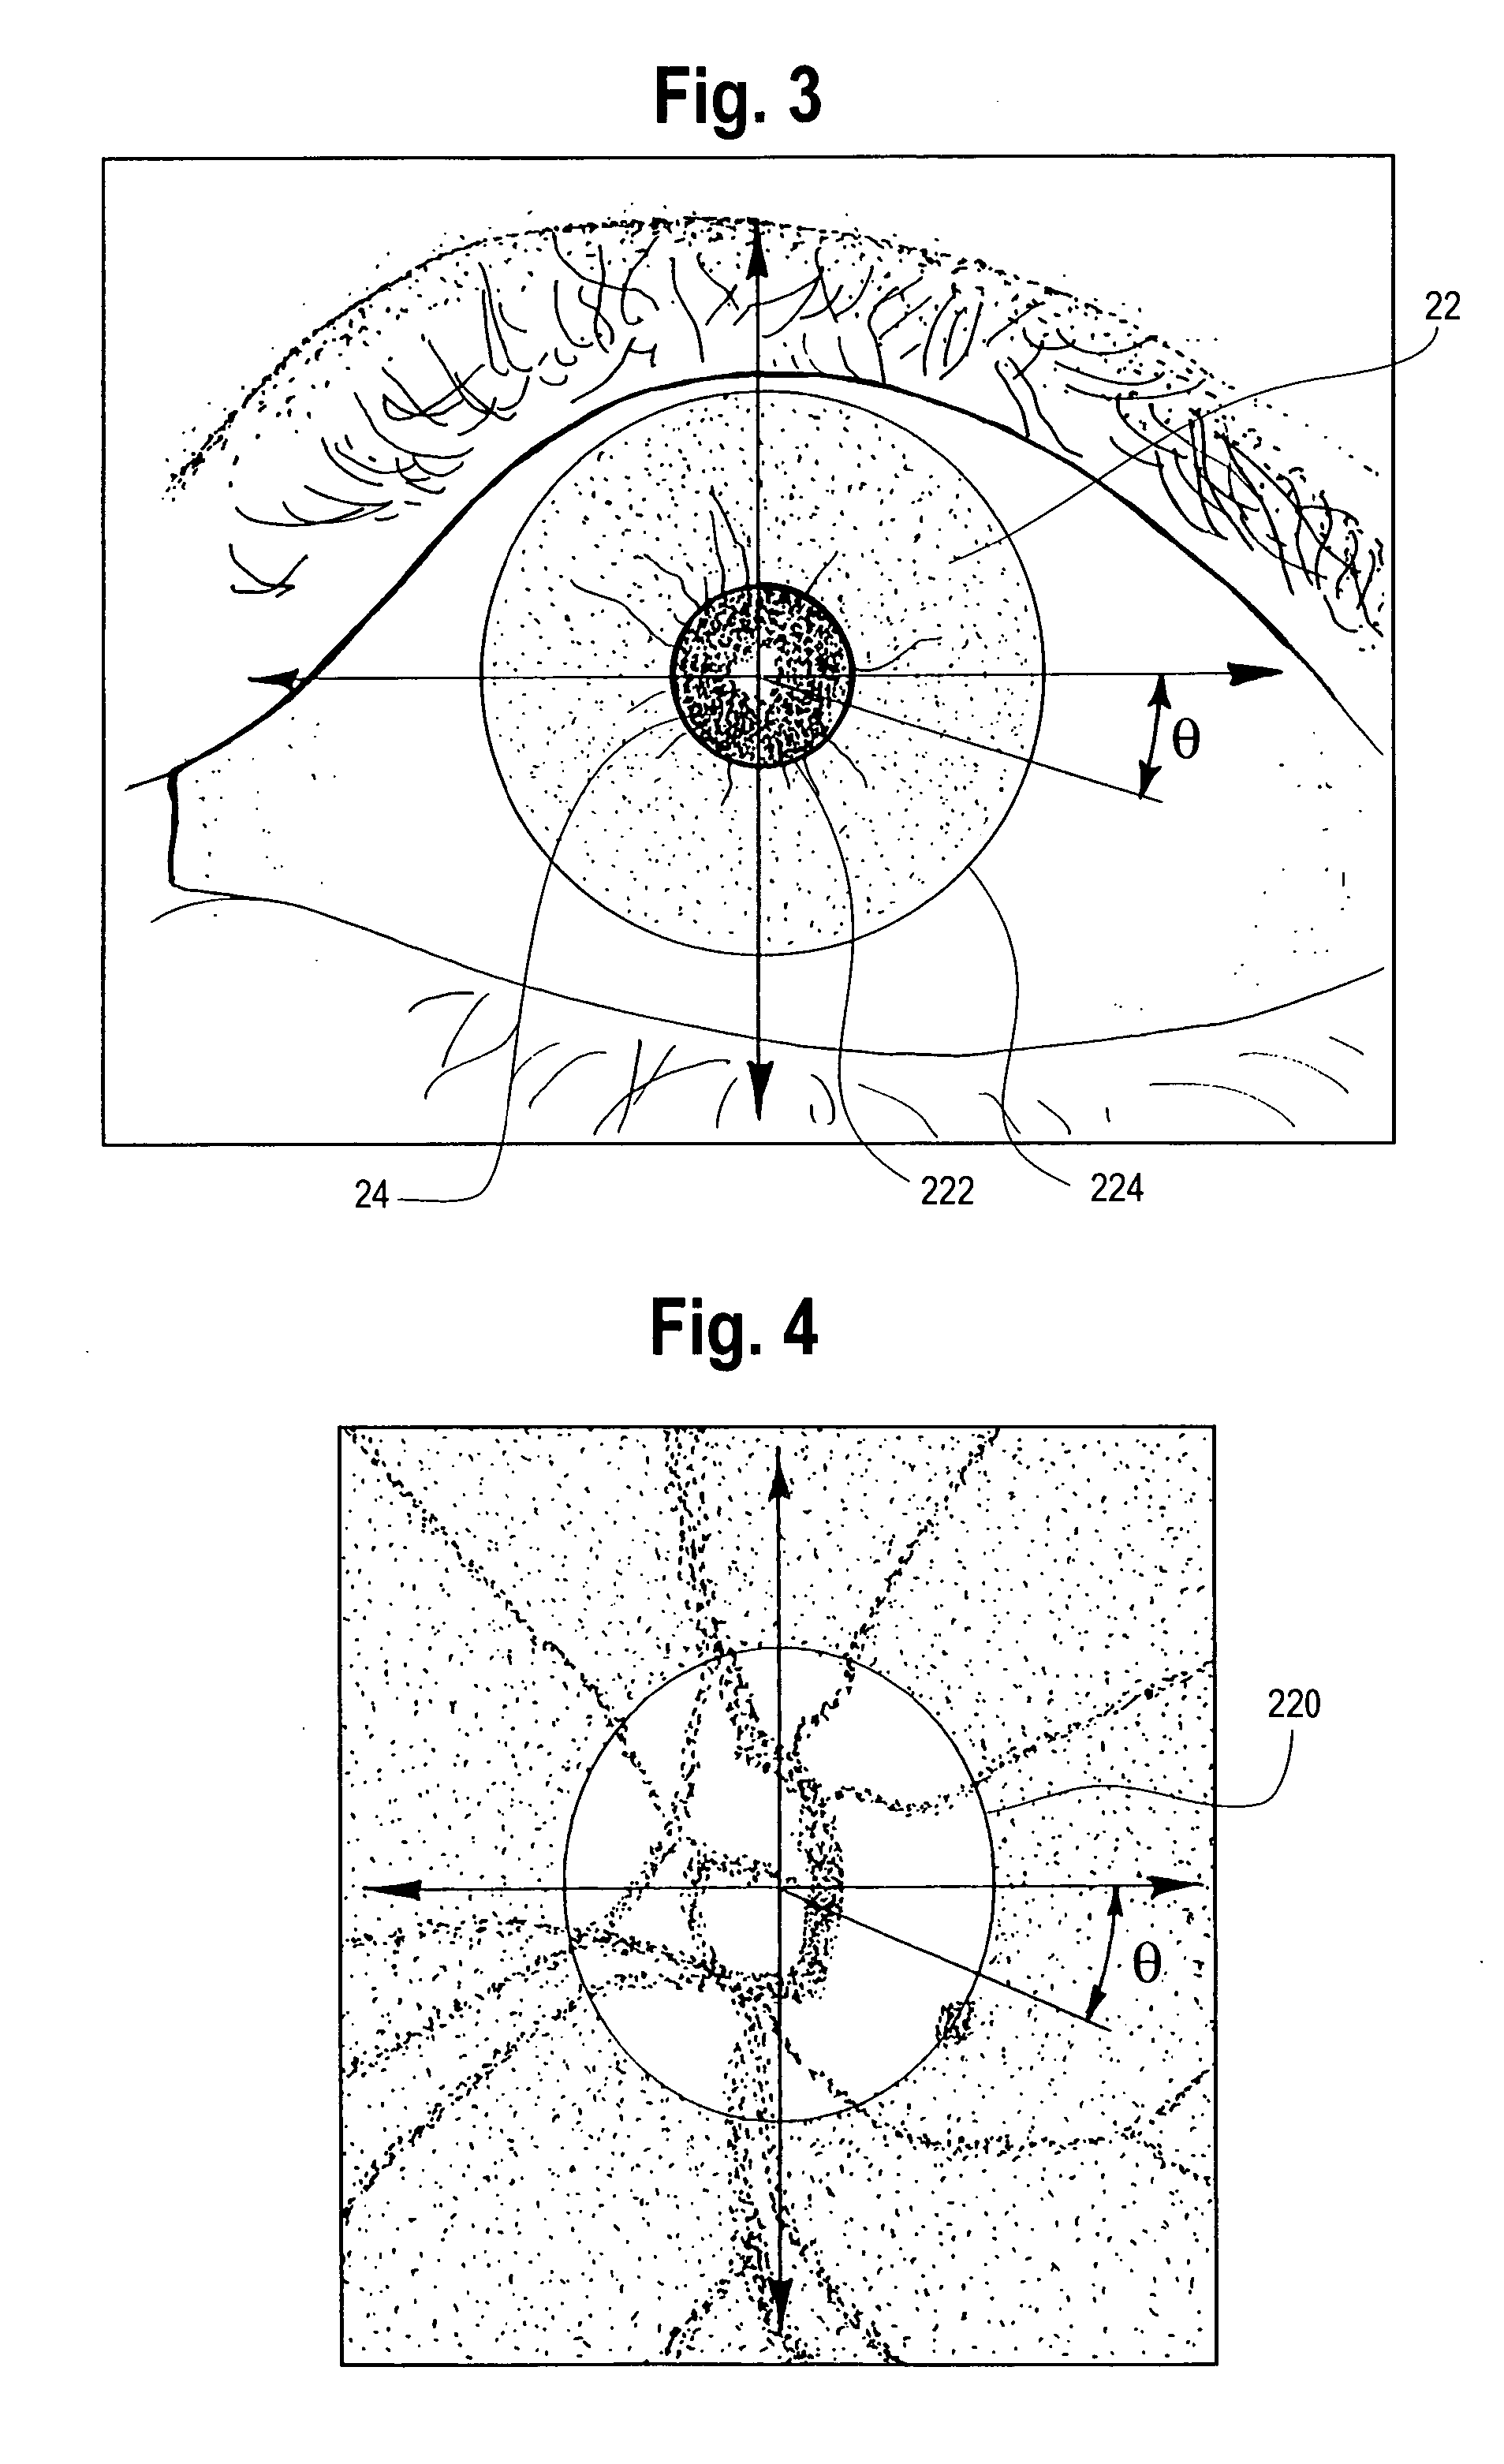 Method and system for generating a combined retina/iris pattern biometric